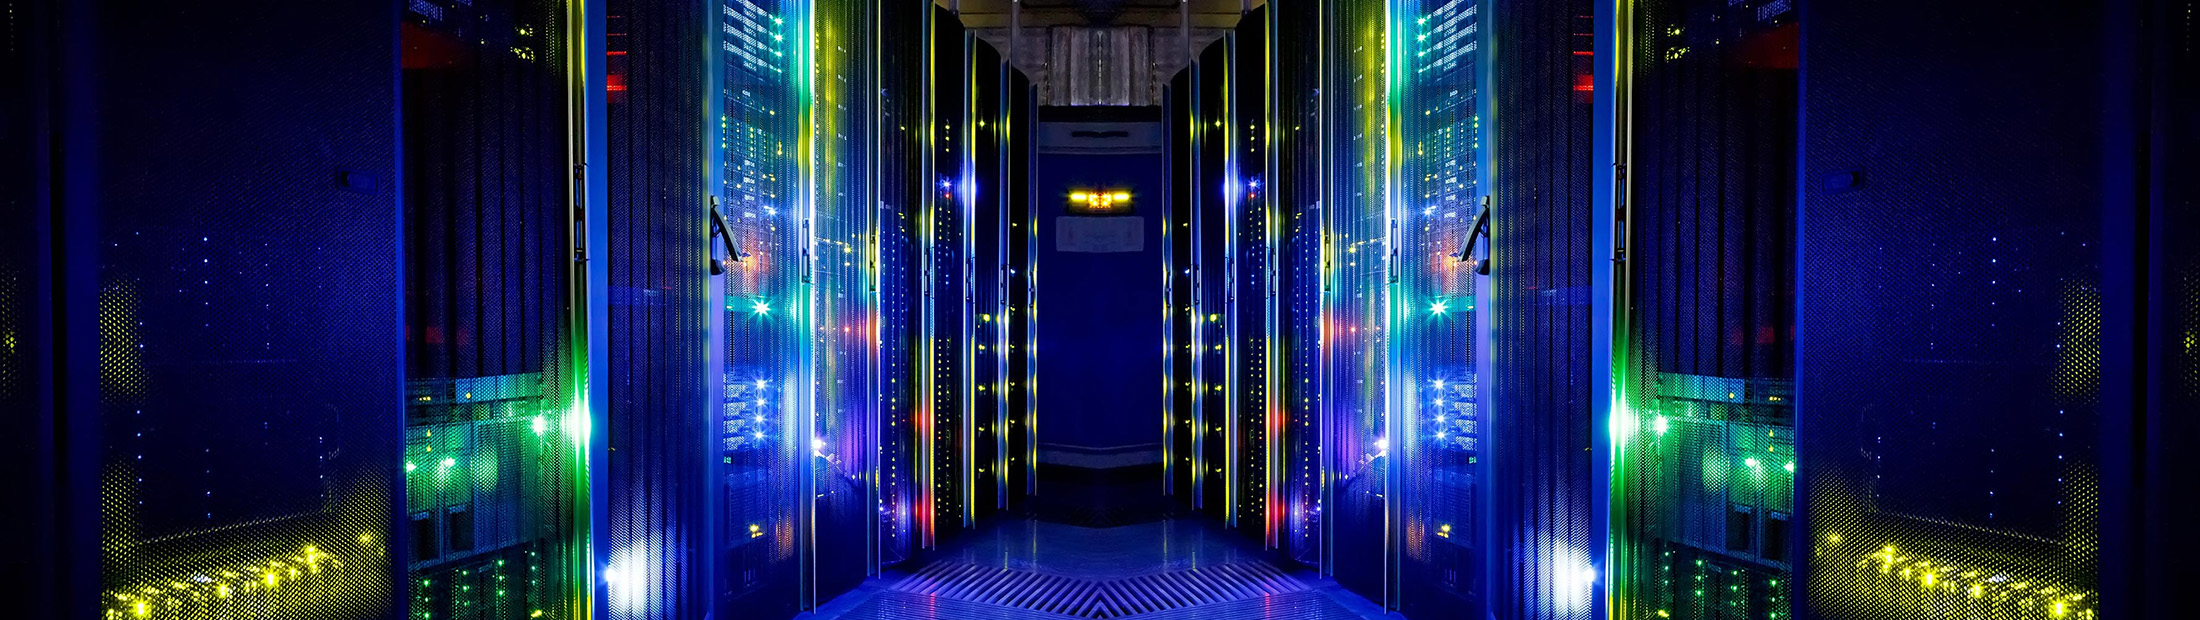 full view image of server rack at a database center